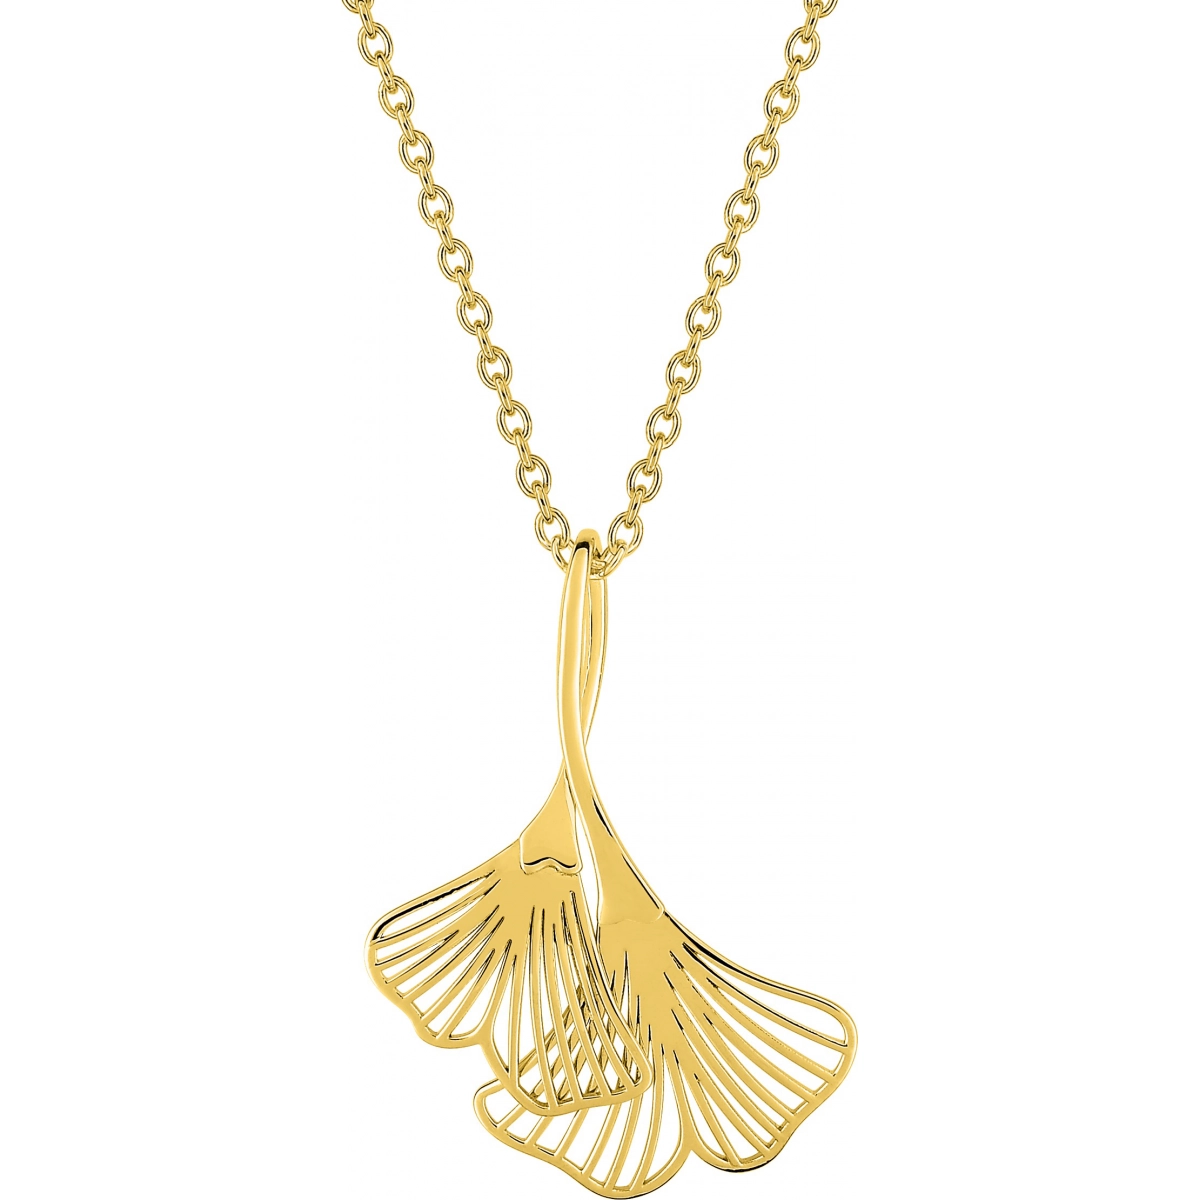 Necklace gold plated Brass  Lua Blanca  132198.0